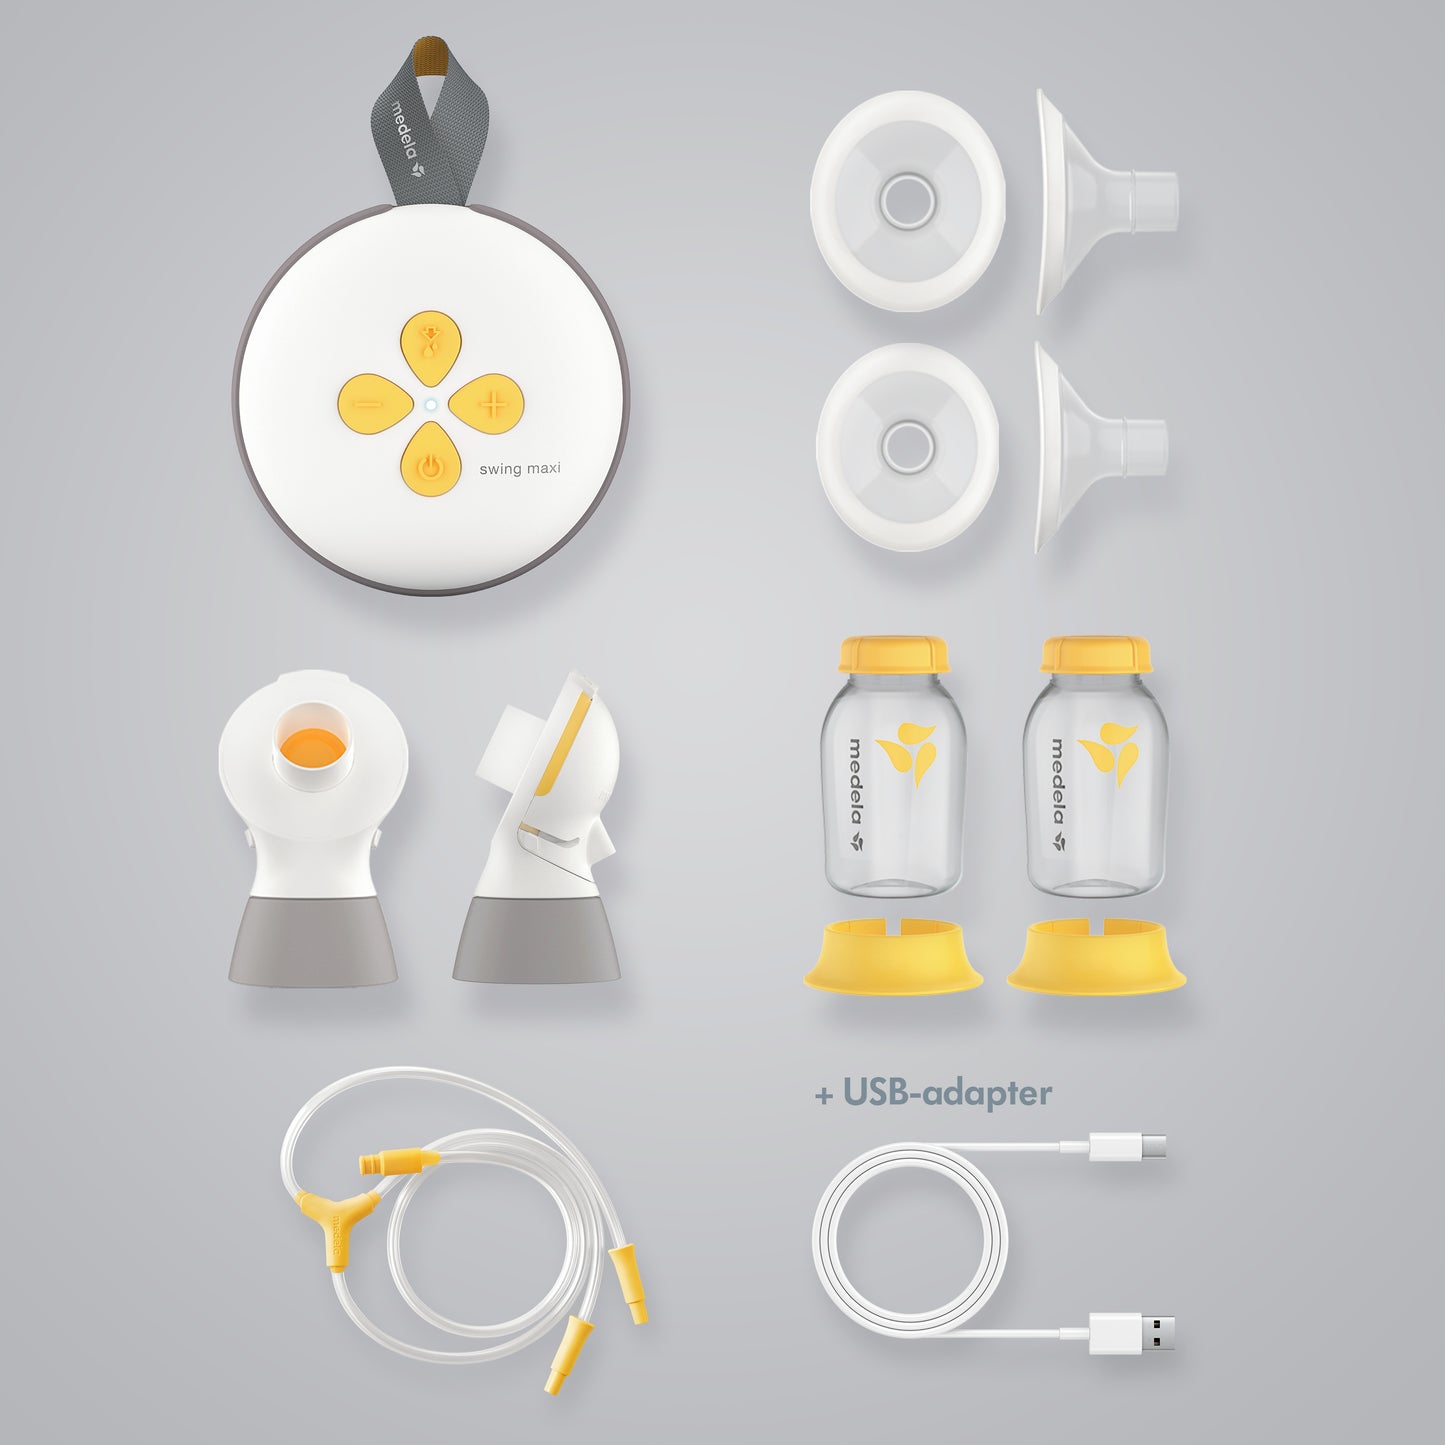 Medela Swing Maxi Double Electric Breast Pump - Redesign Double Electric Milk Pump